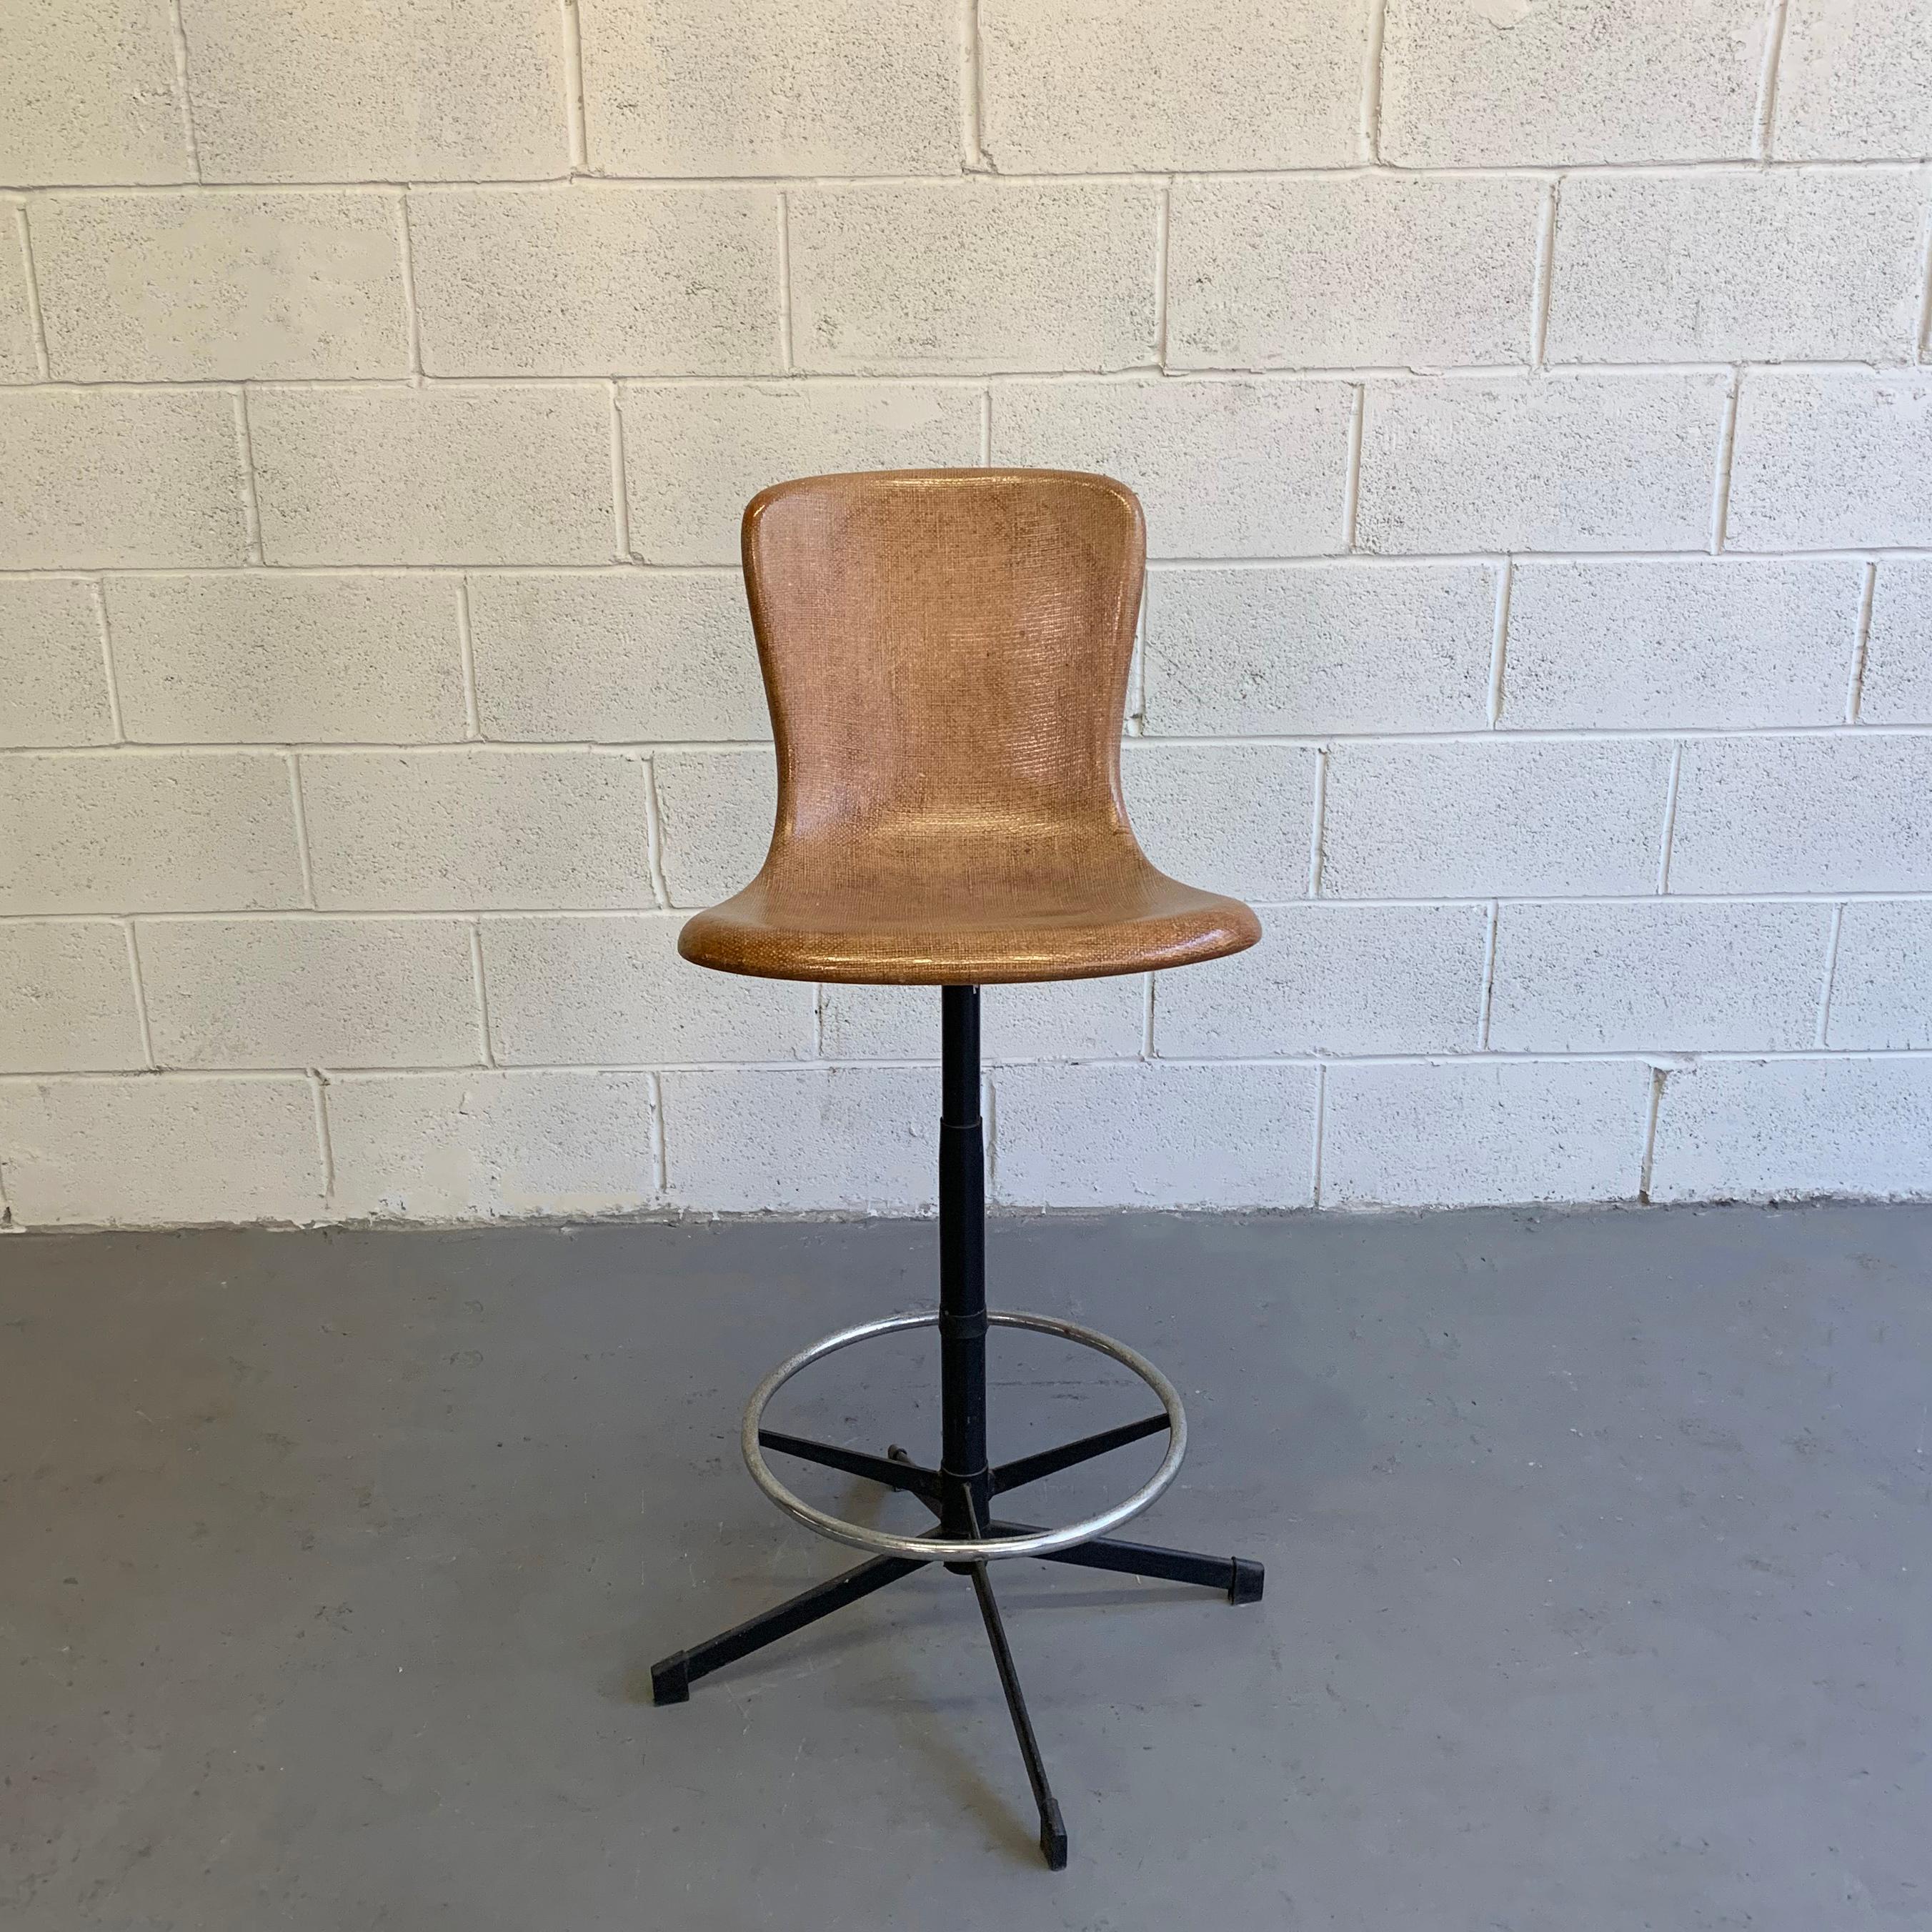 Tall, Mid-Century Modern stool by Cosco features a 17 inch wide, tan grasscloth, fiberglass shell on a steel pedestal base with footrest.